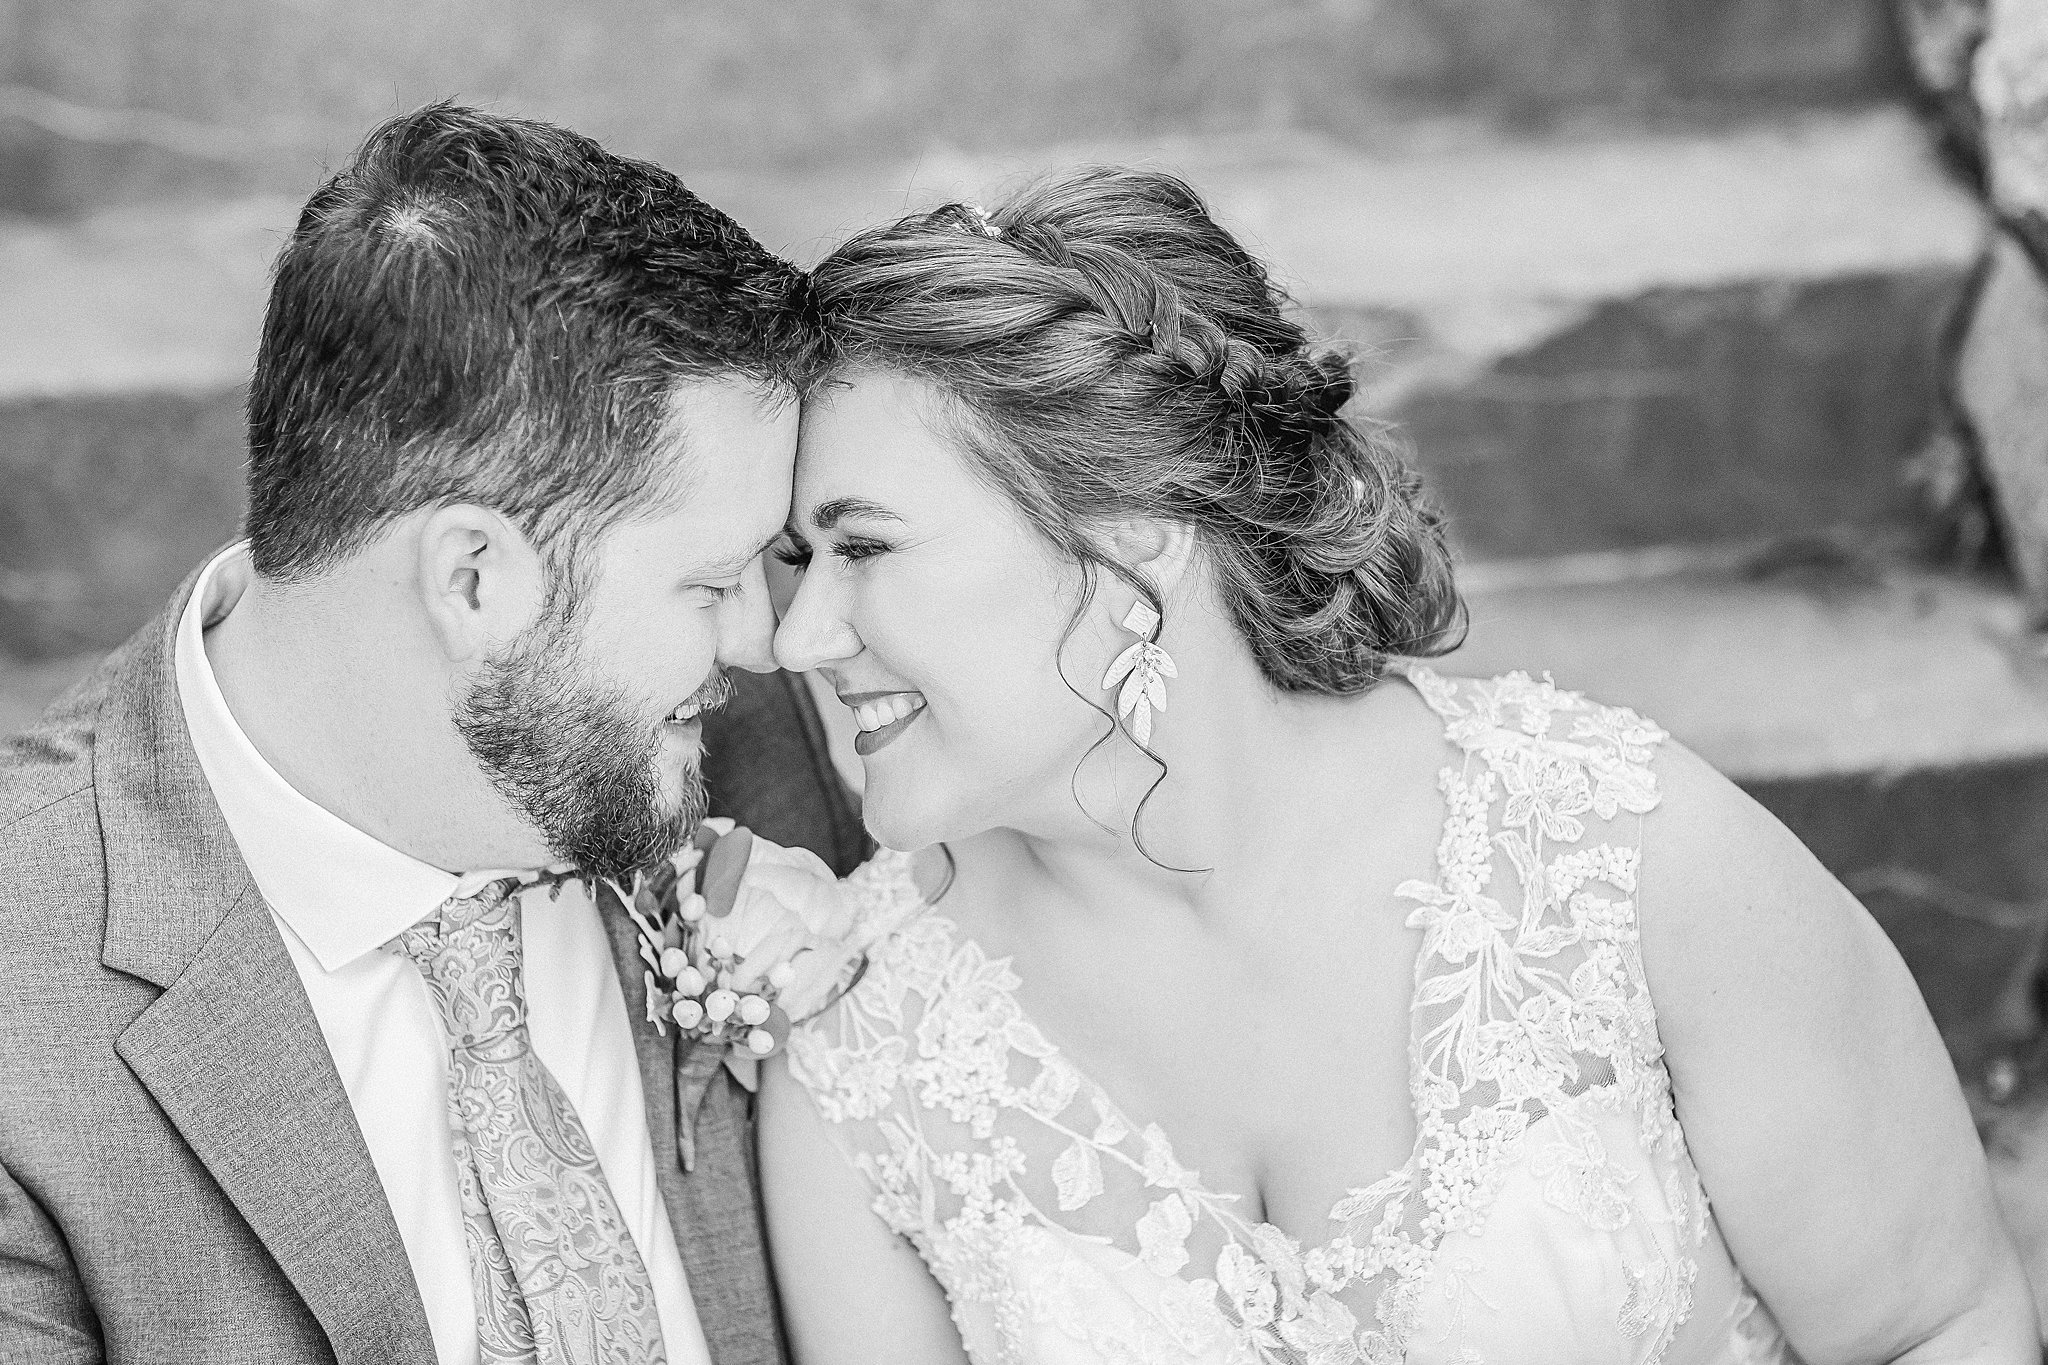 Black and white wedding portrait by Abby Anderson Wedding Photographer Fargo ND Moorhead MN 